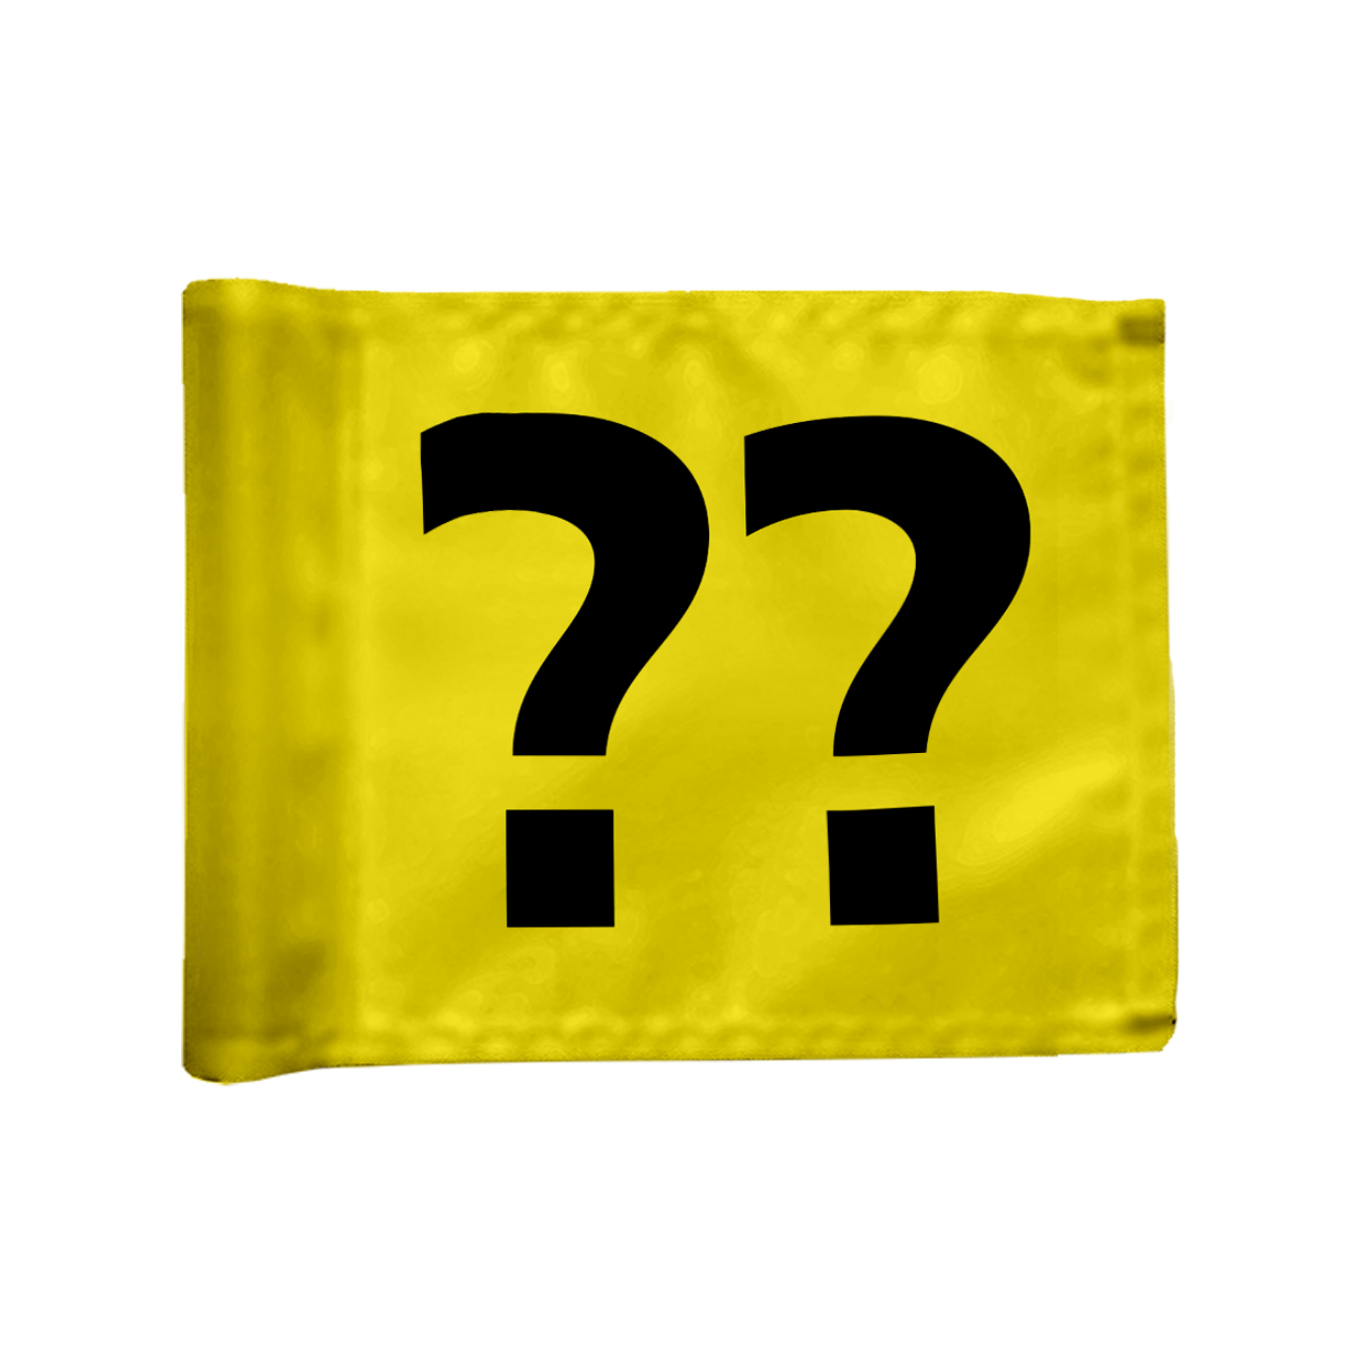 Single golf flag, yellow with optional hole number, 200 gram fabric 